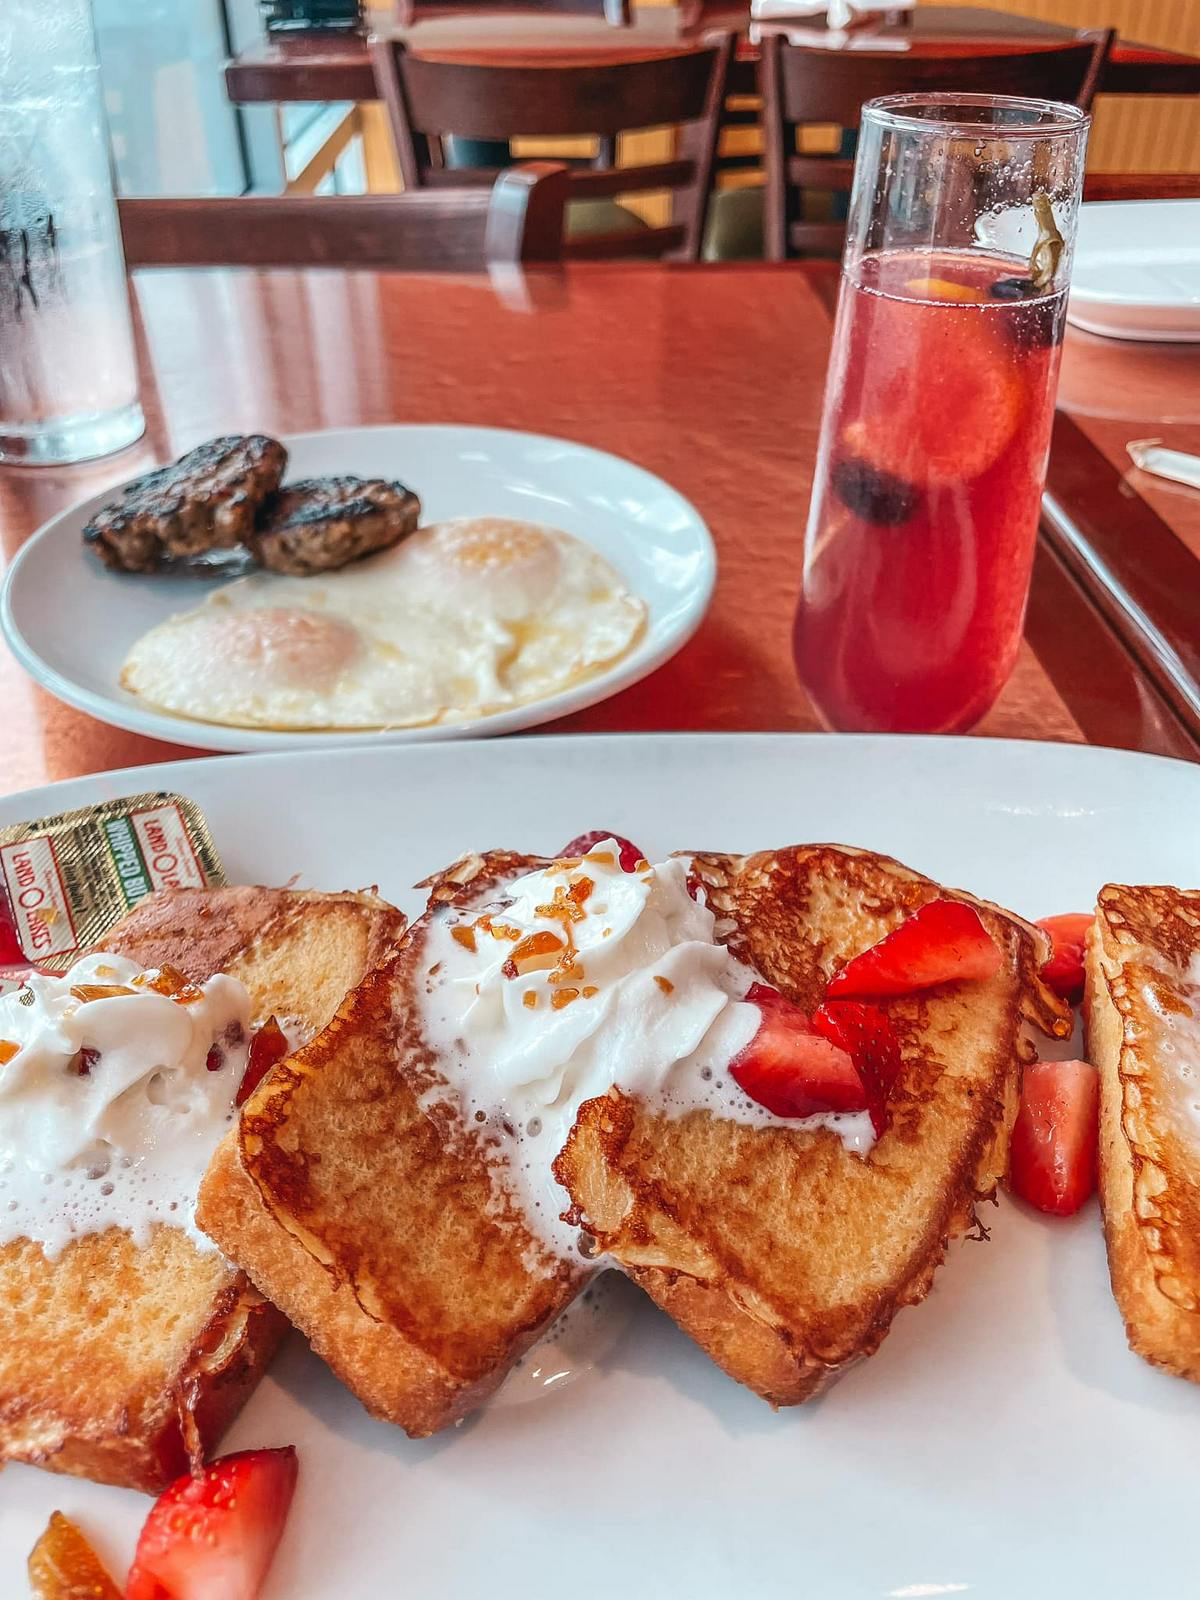 Strawberry shortcake french toast from Another Broken Egg breakfast restaurant in Clearwater Beach